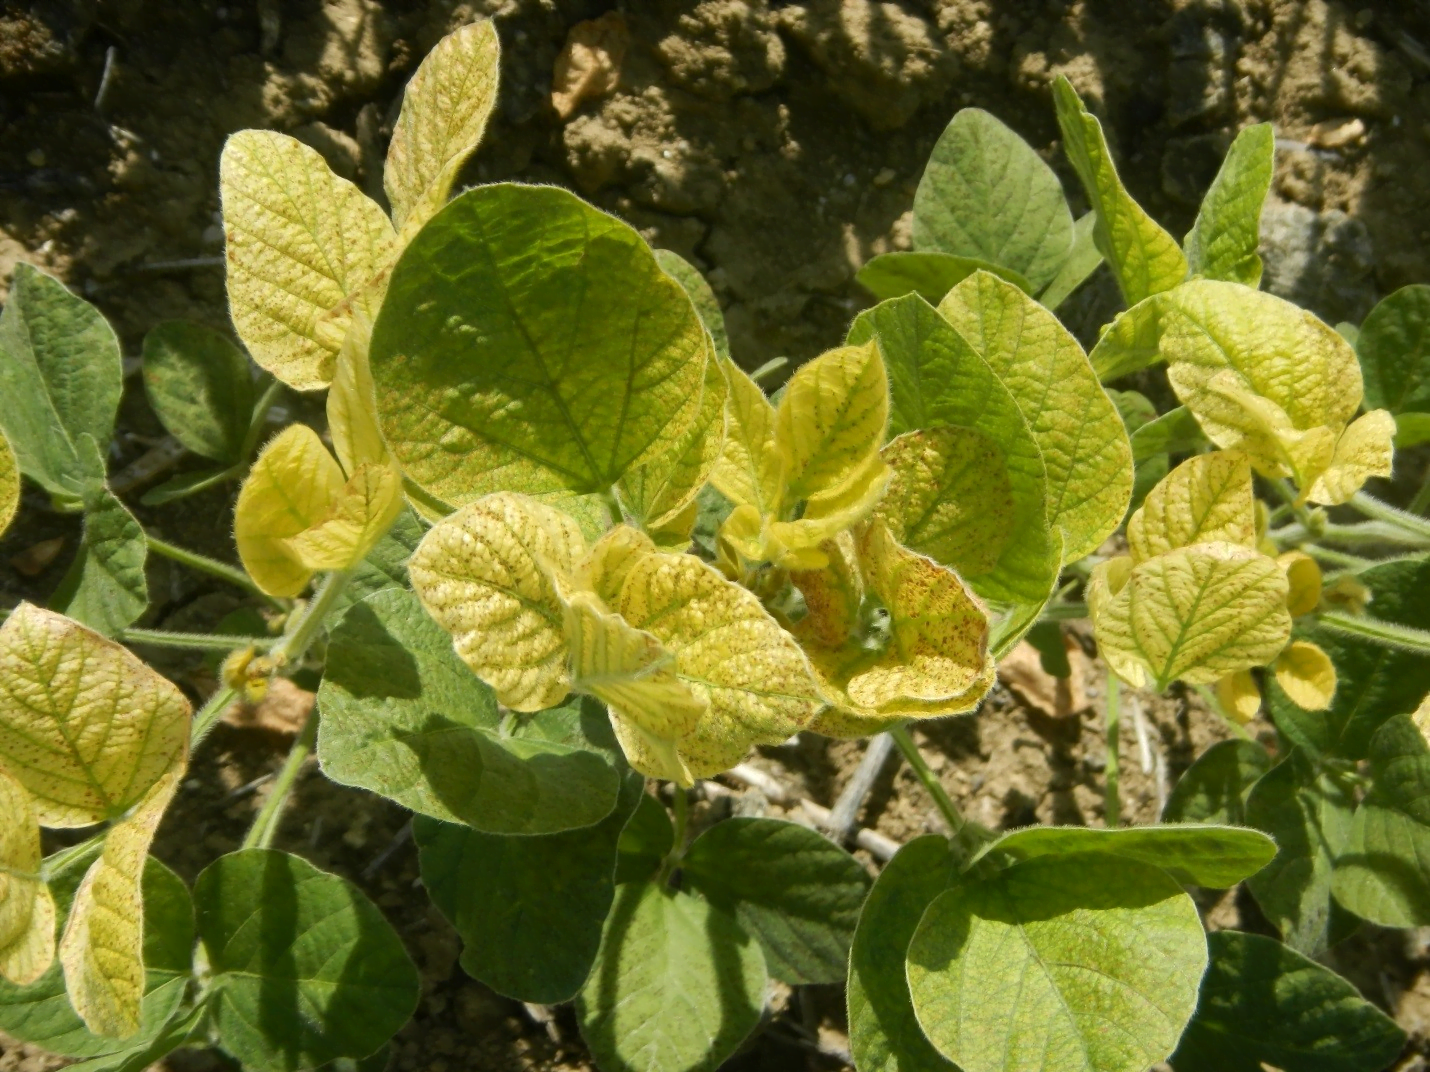 Iron deficiency in legumes - Plant World